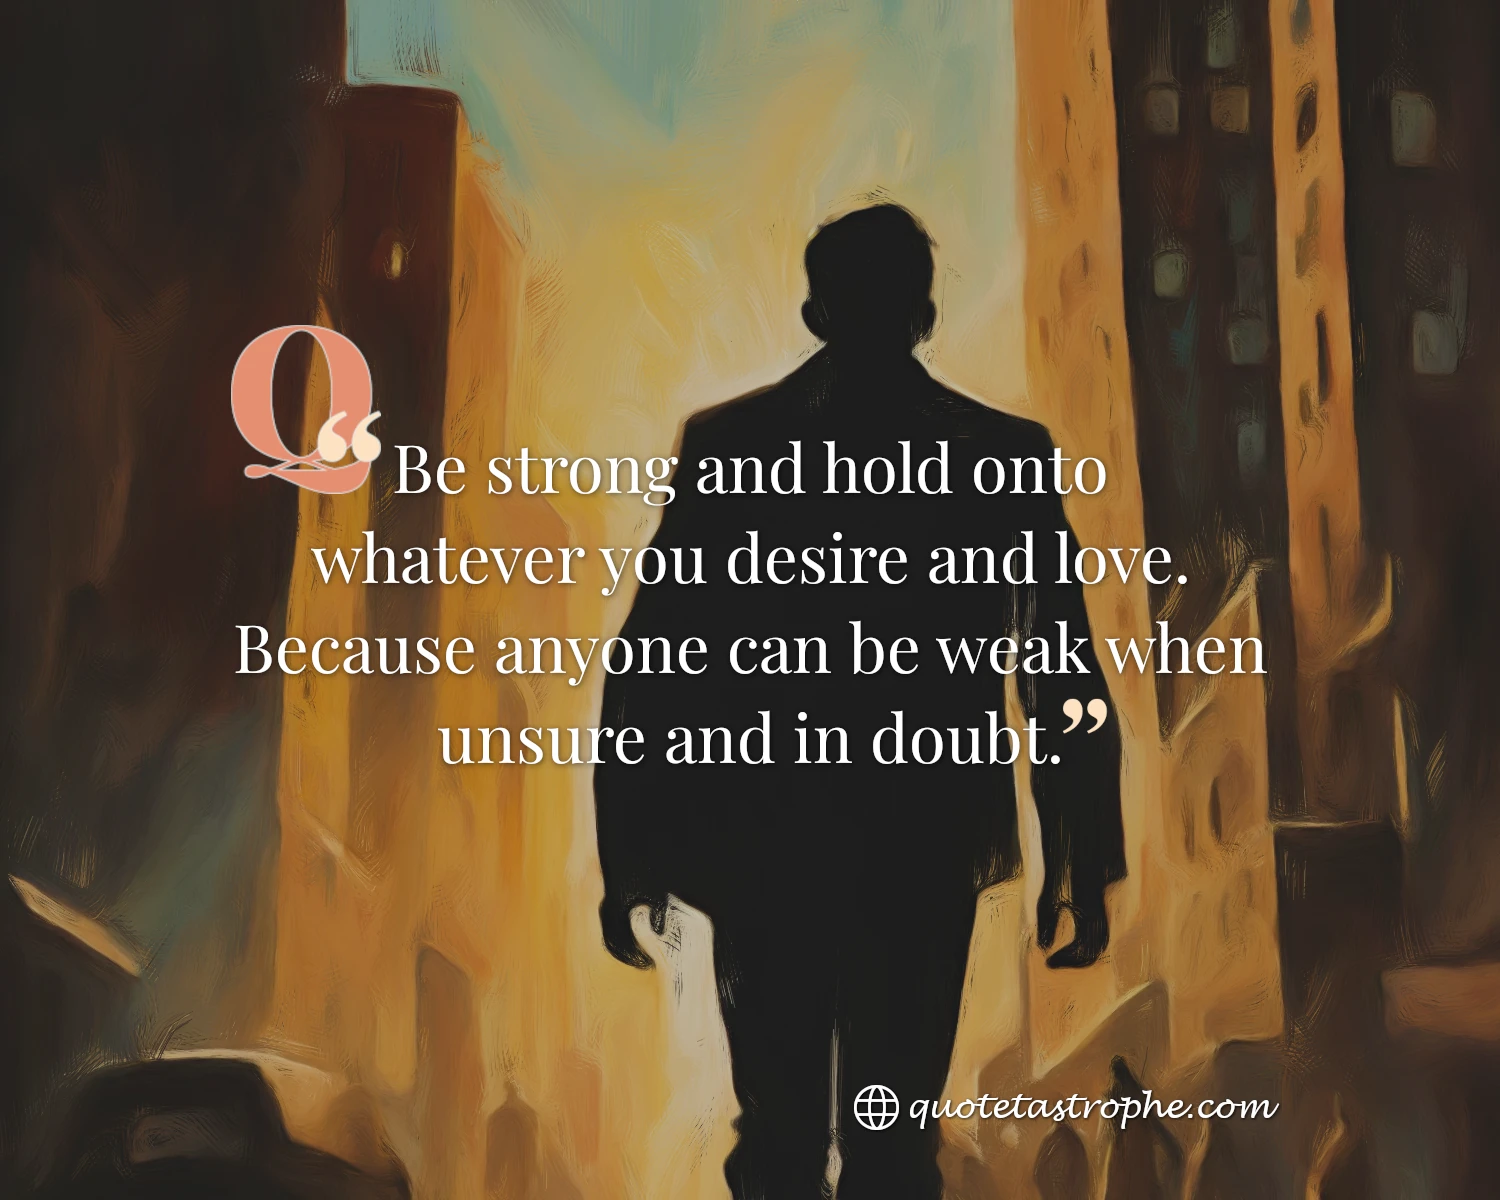 Be Strong & Hold onto Whatever You Desire and Love